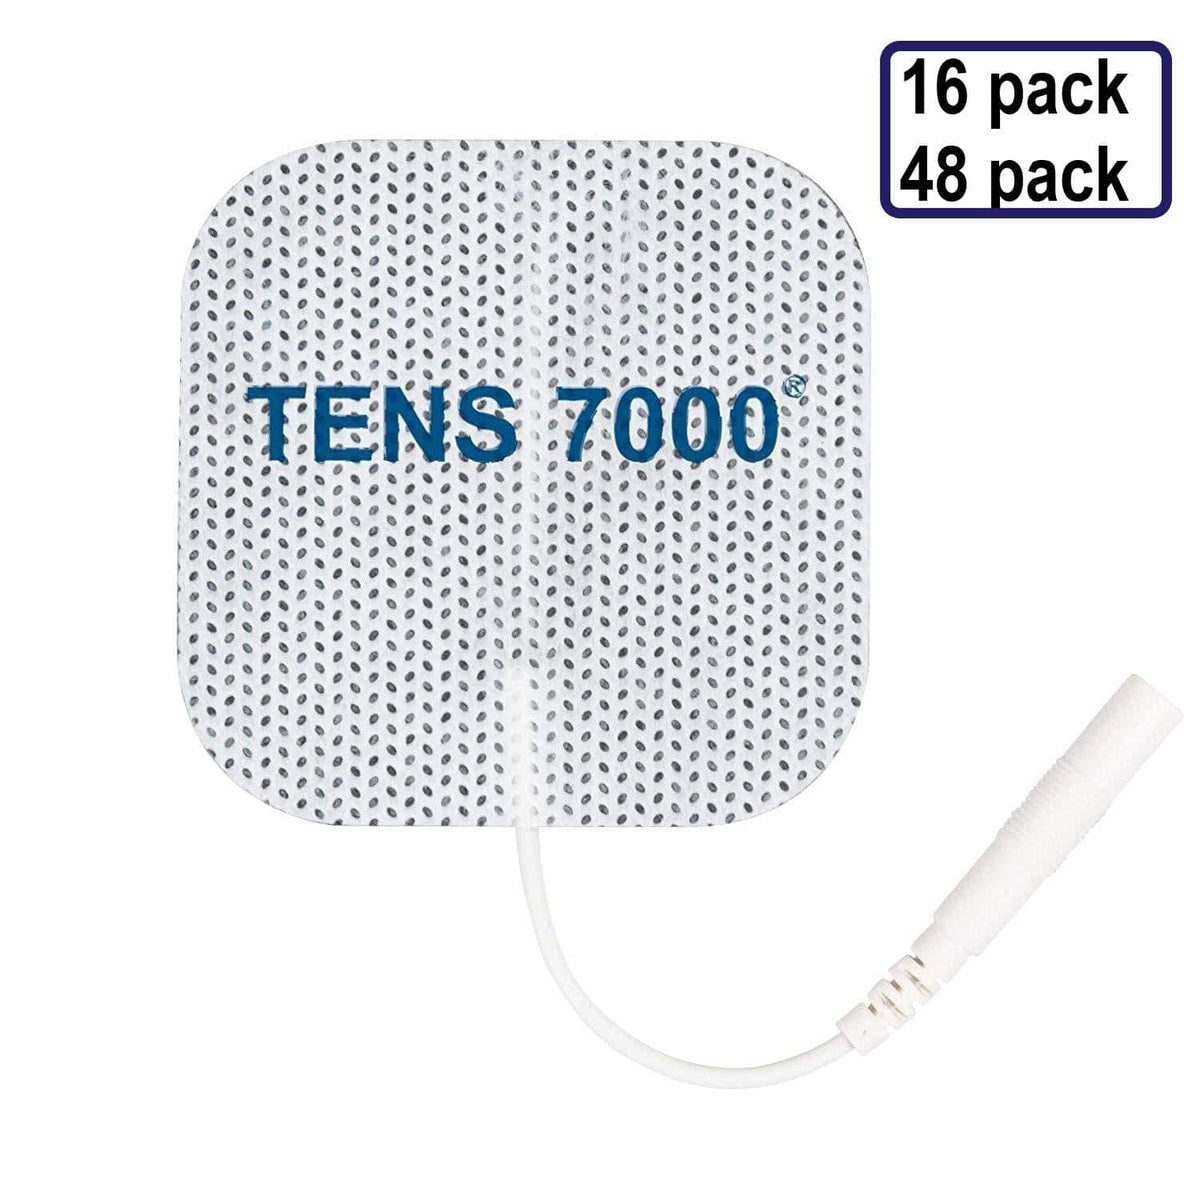 TENS 7000 Official TENS Unit Electrode Pads, 16 Pack - Premium Quality OTC  TENS Pads, 2 X 2 - Compatible with Most TENS Machines, Replacement